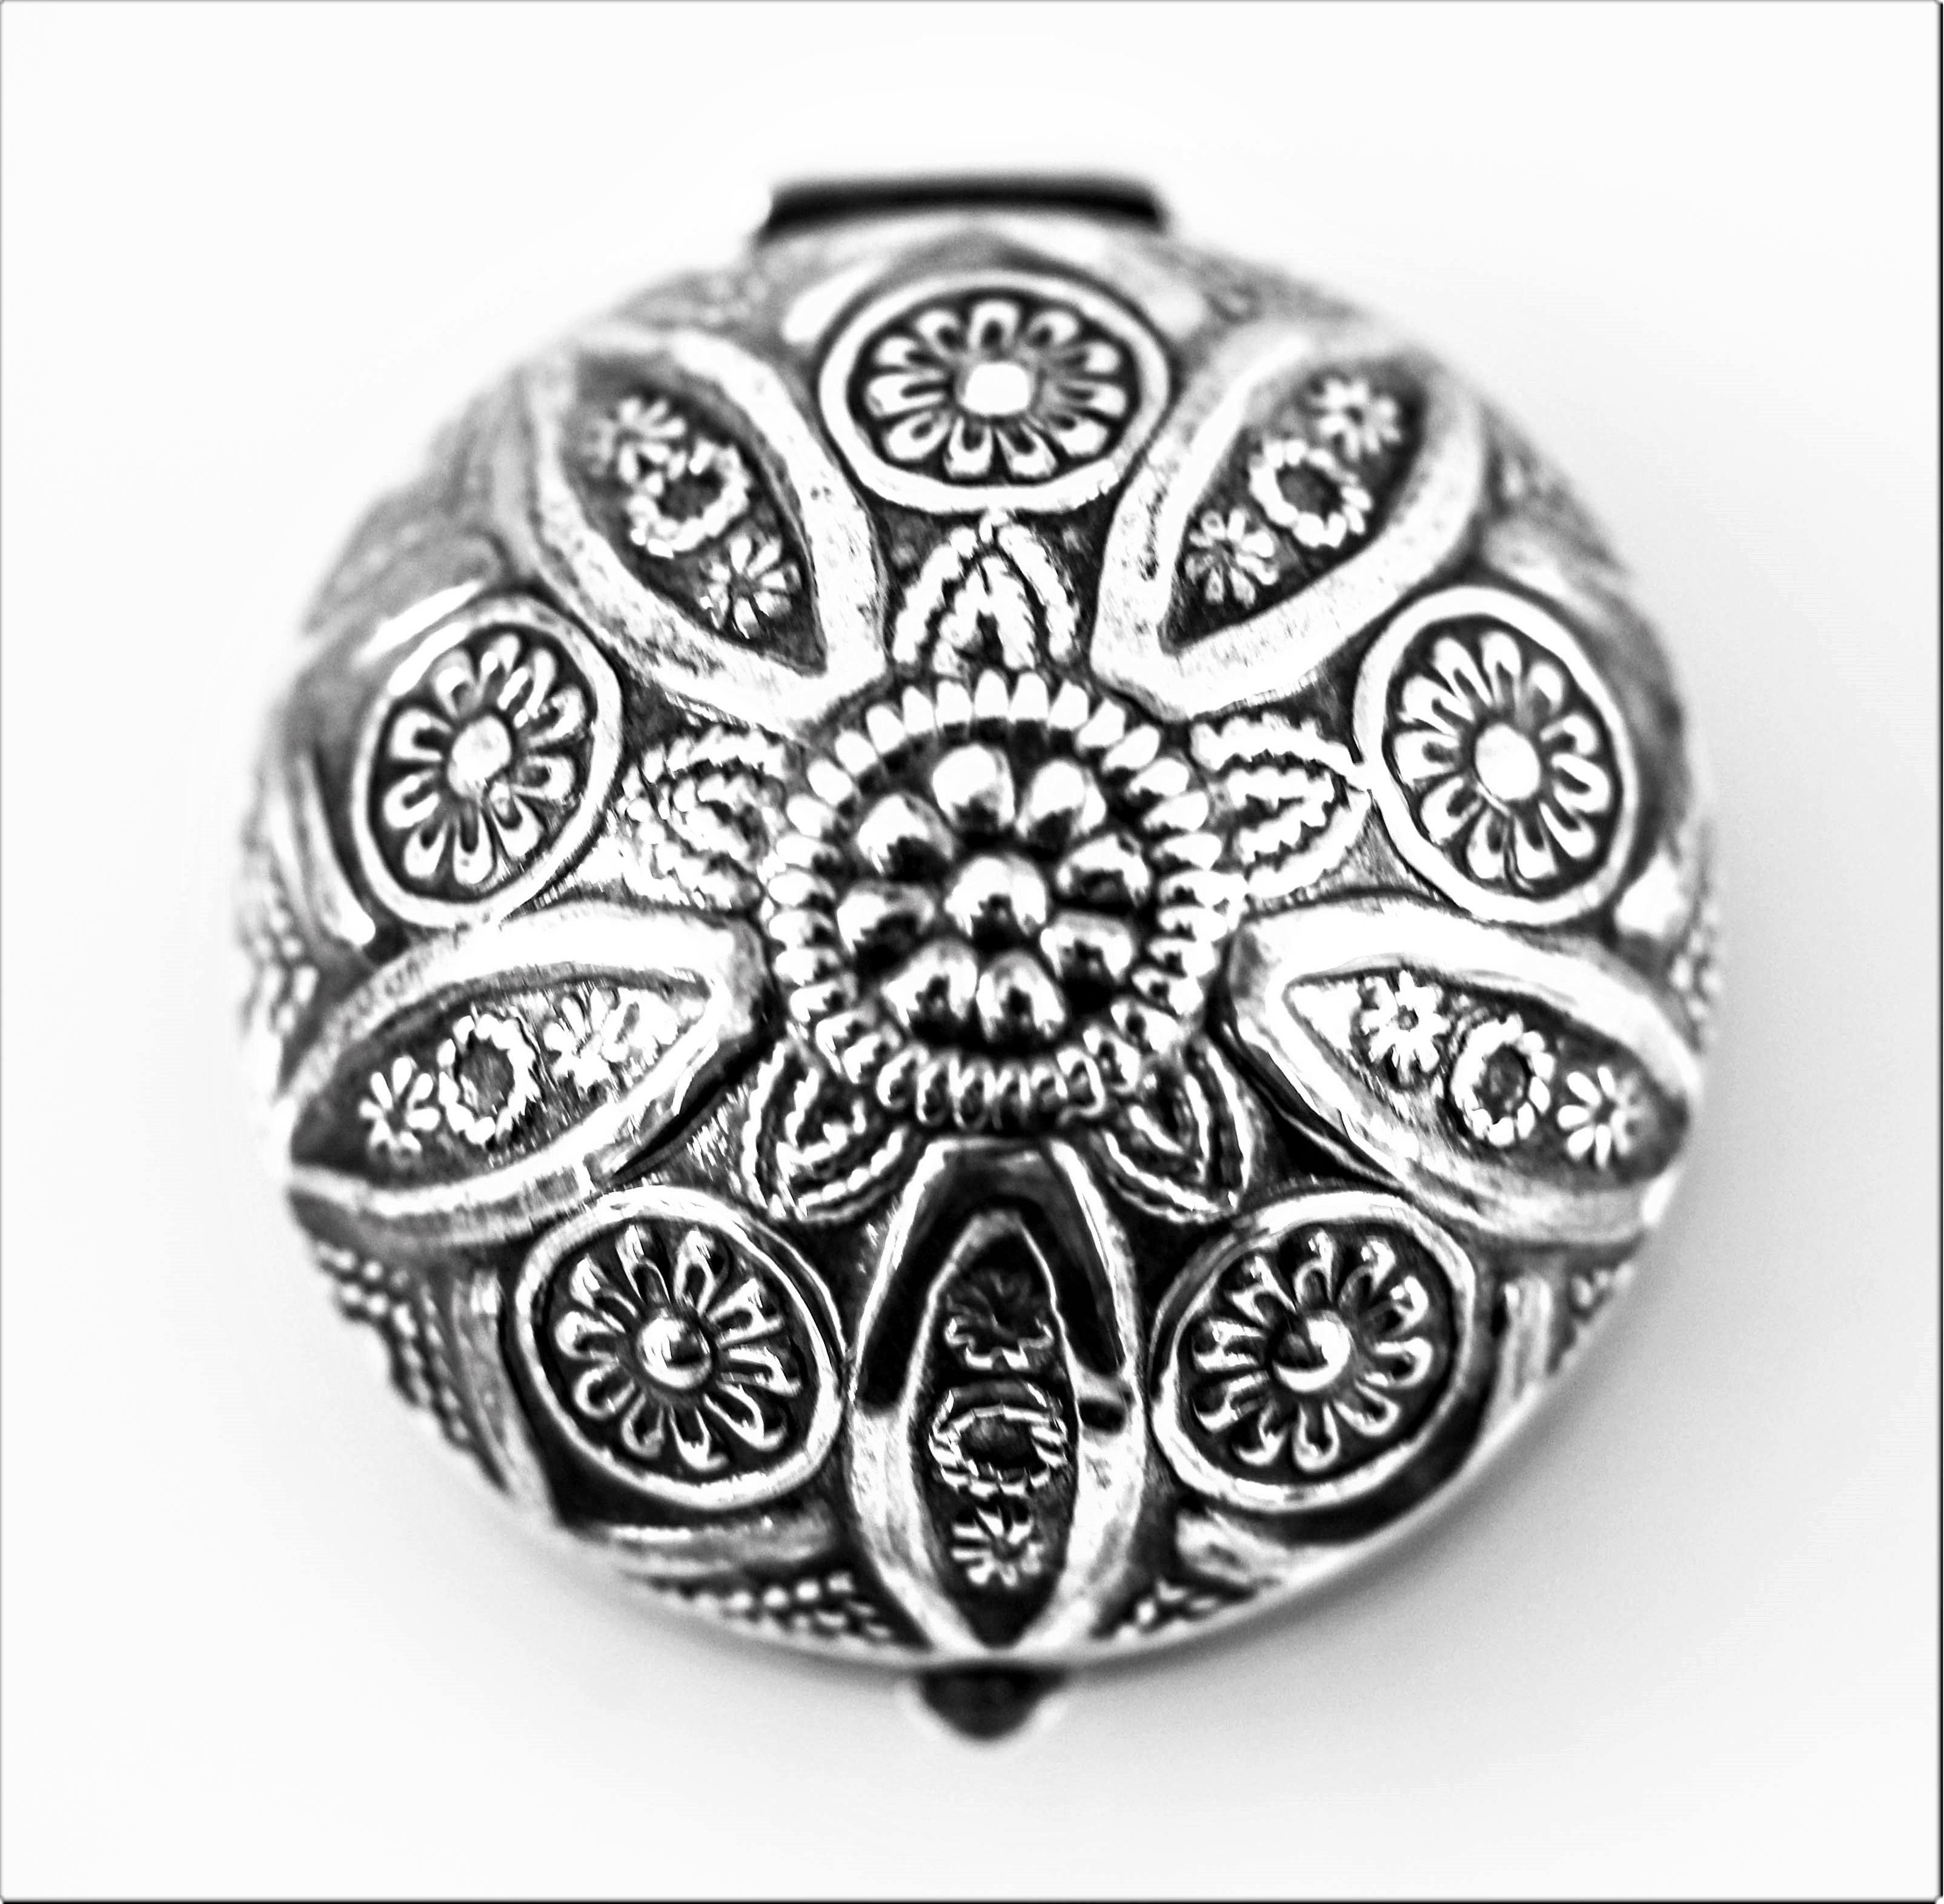 This sterling pill box is designed in a Persian style with a filigree motif. It is round on top and has a flat surface/bottom. It has a clasp on the side to open and close the lid. The lid is secured by a hinge to insure your pills stay intact. A